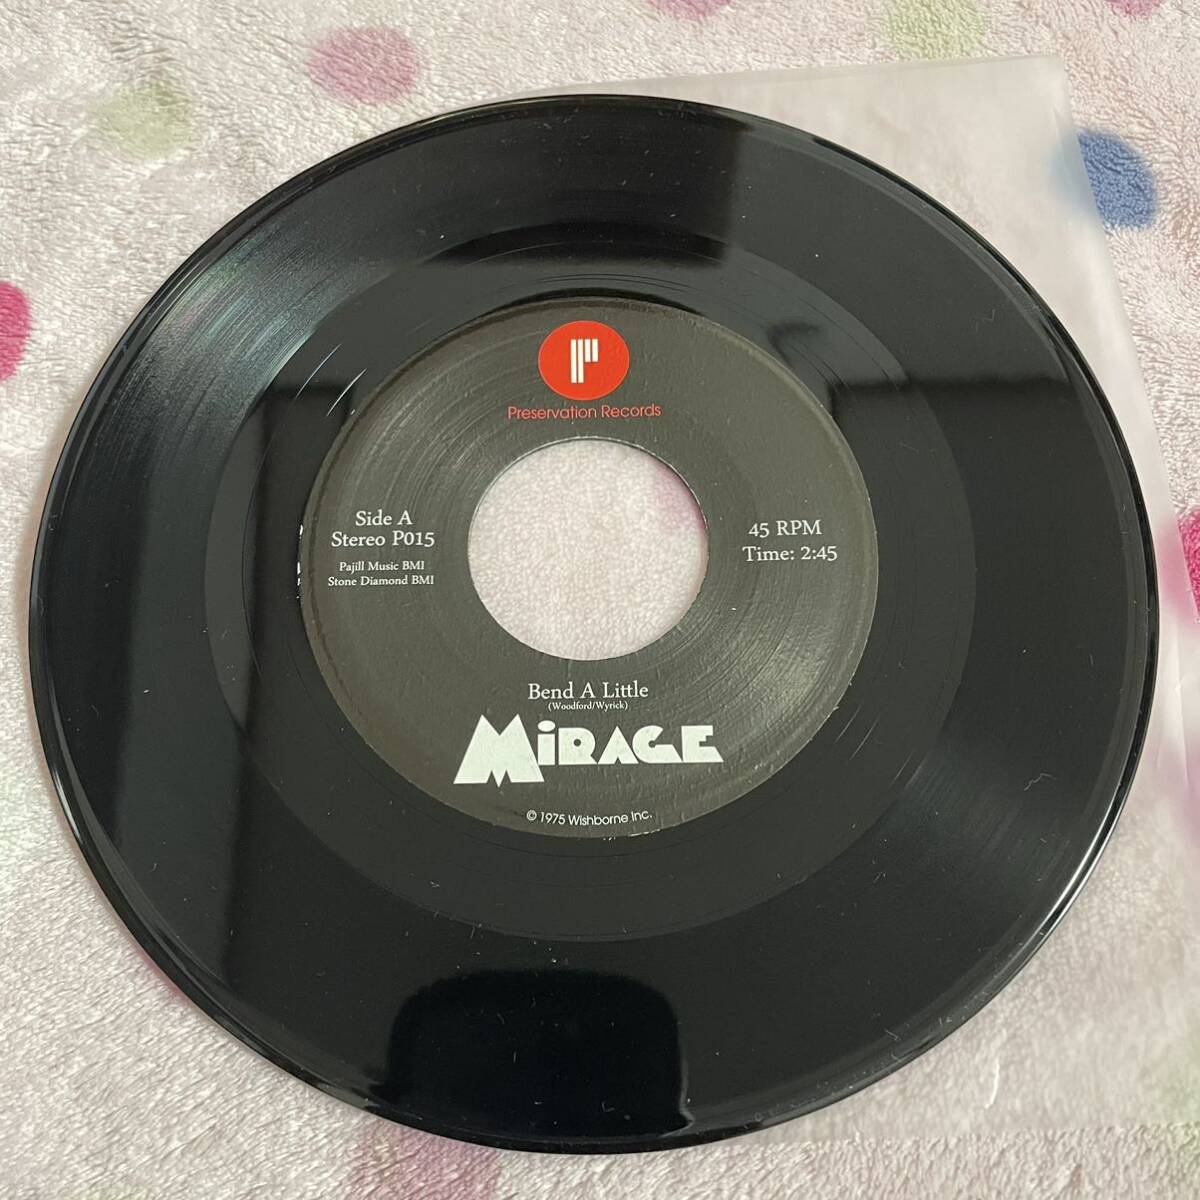 【7inch】◆即決◆中古■【MIRAGE / Bend A Little / I've Got The Notion】7インチ EP■P015 free soul funk aor light mellow Supremesの画像2